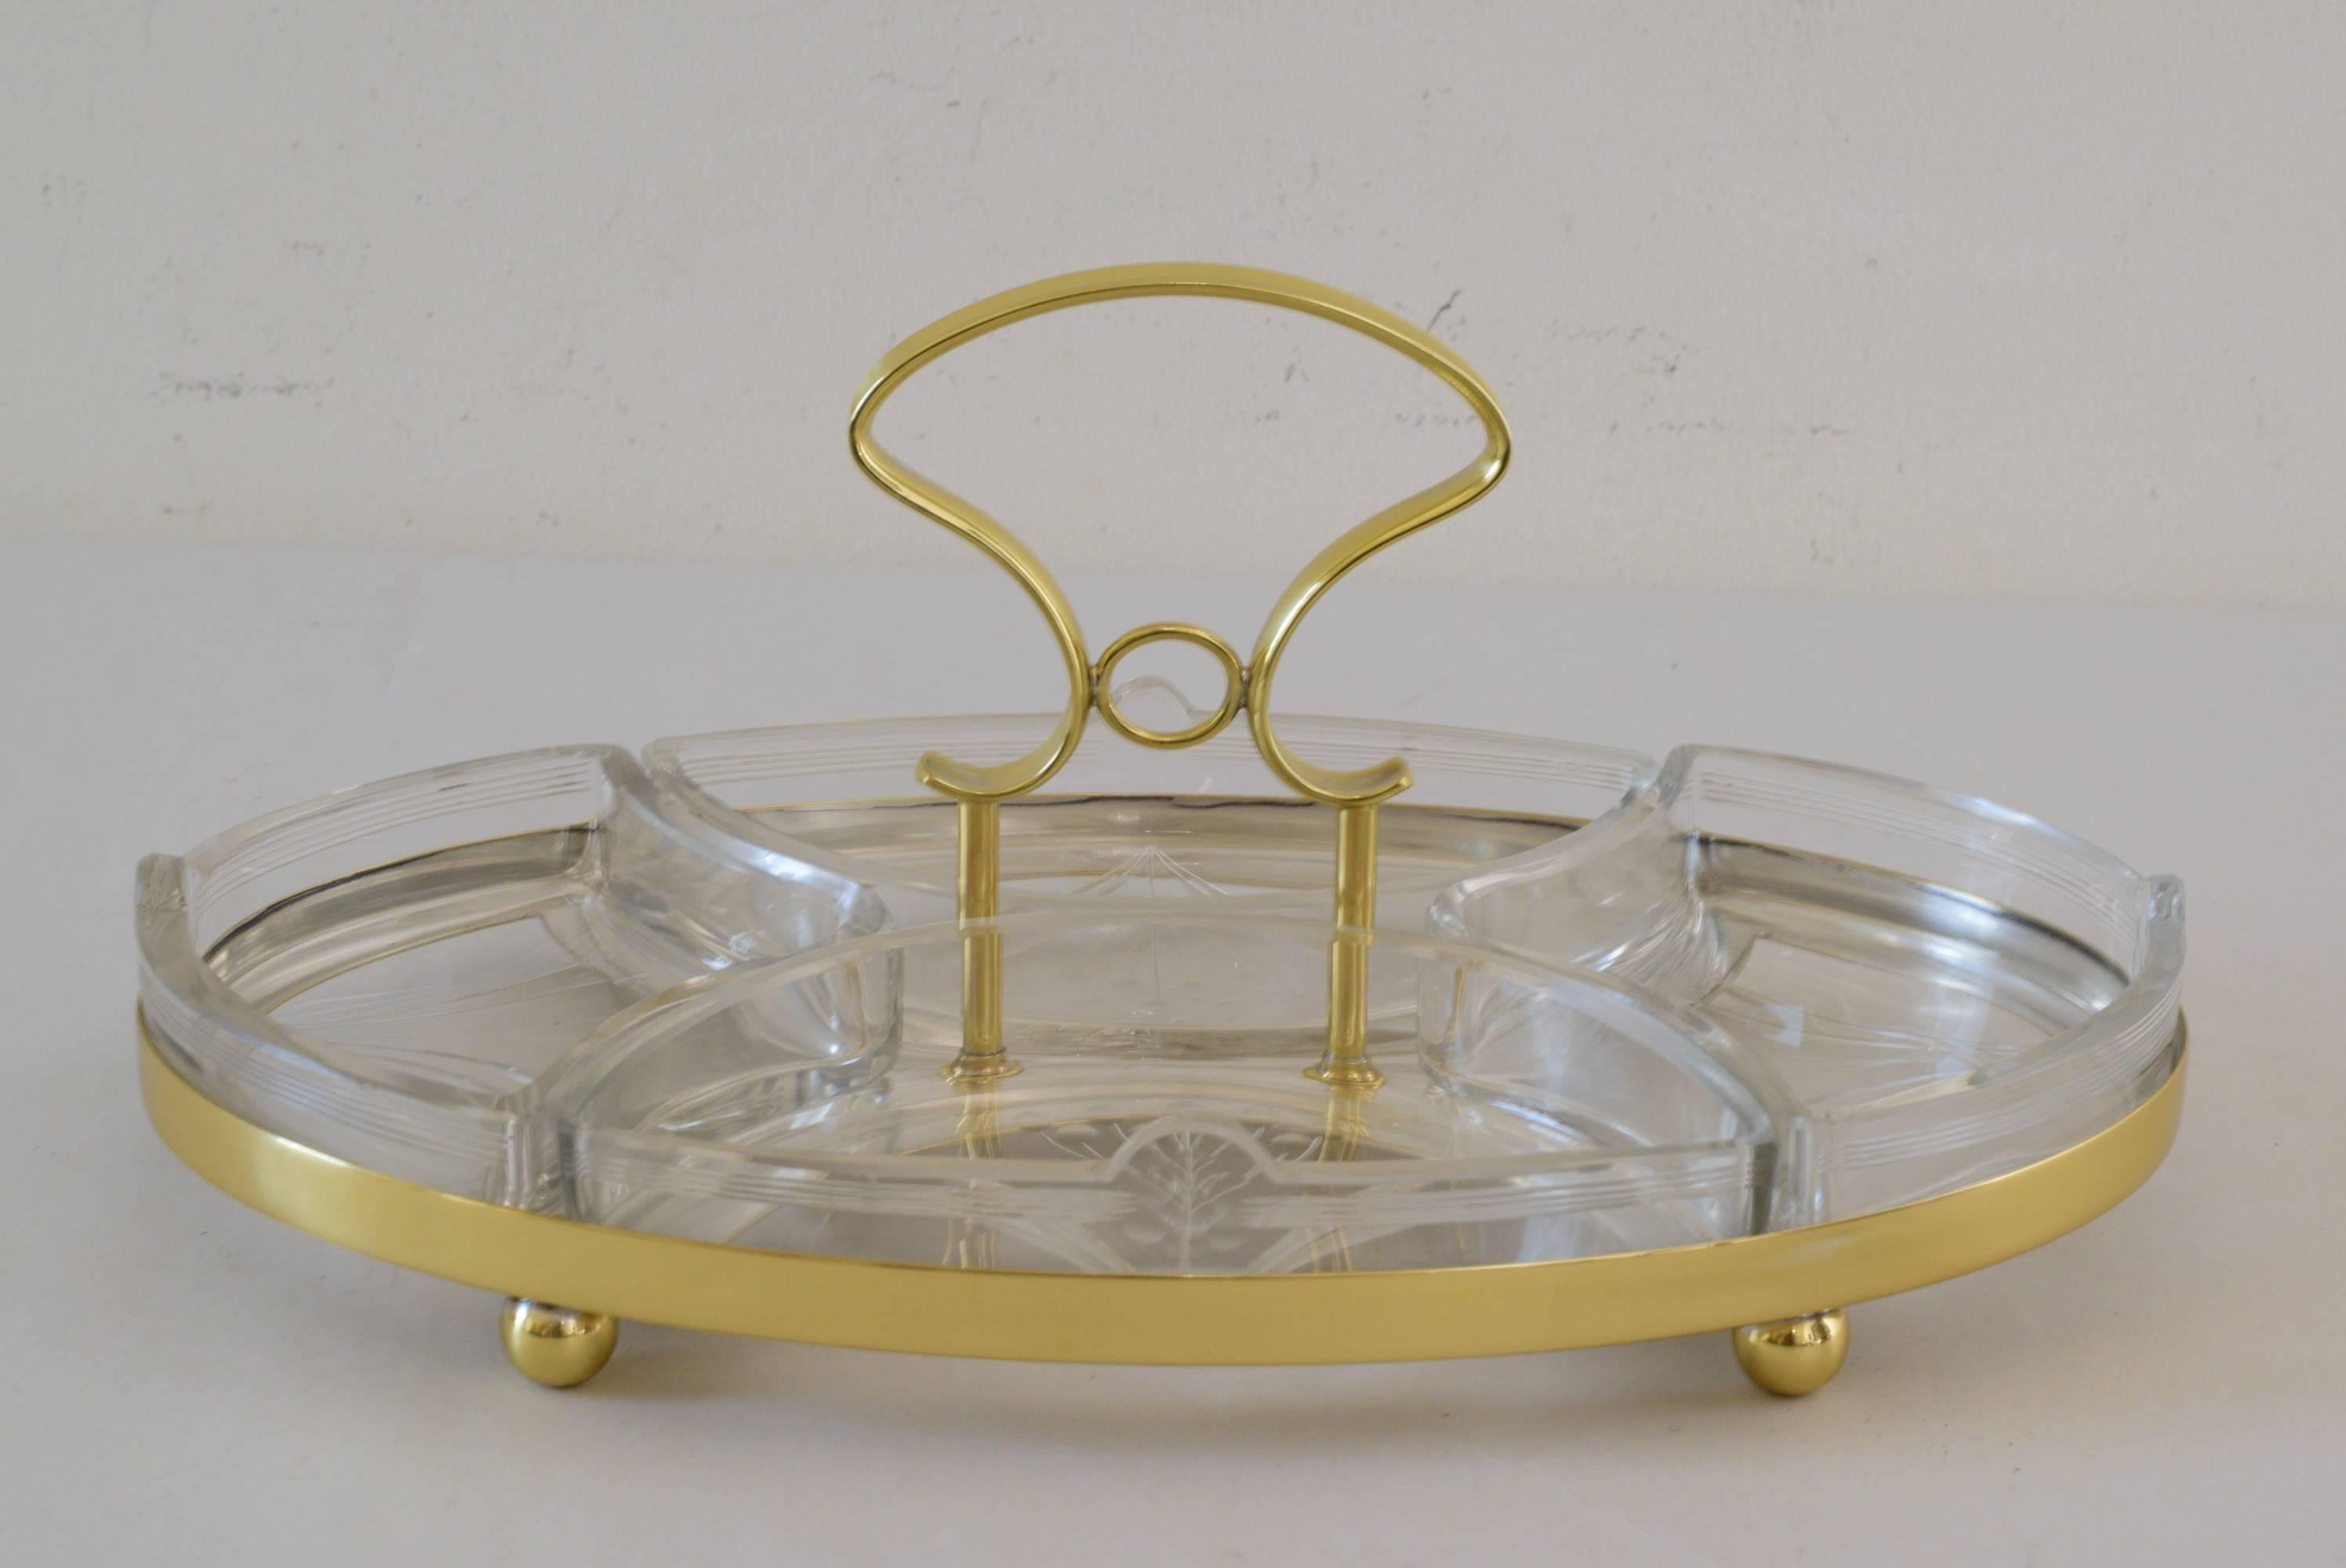 Jugendstil WMF centerpiece with original cut glass.
Four separate insets.
Polished and stove enameled.